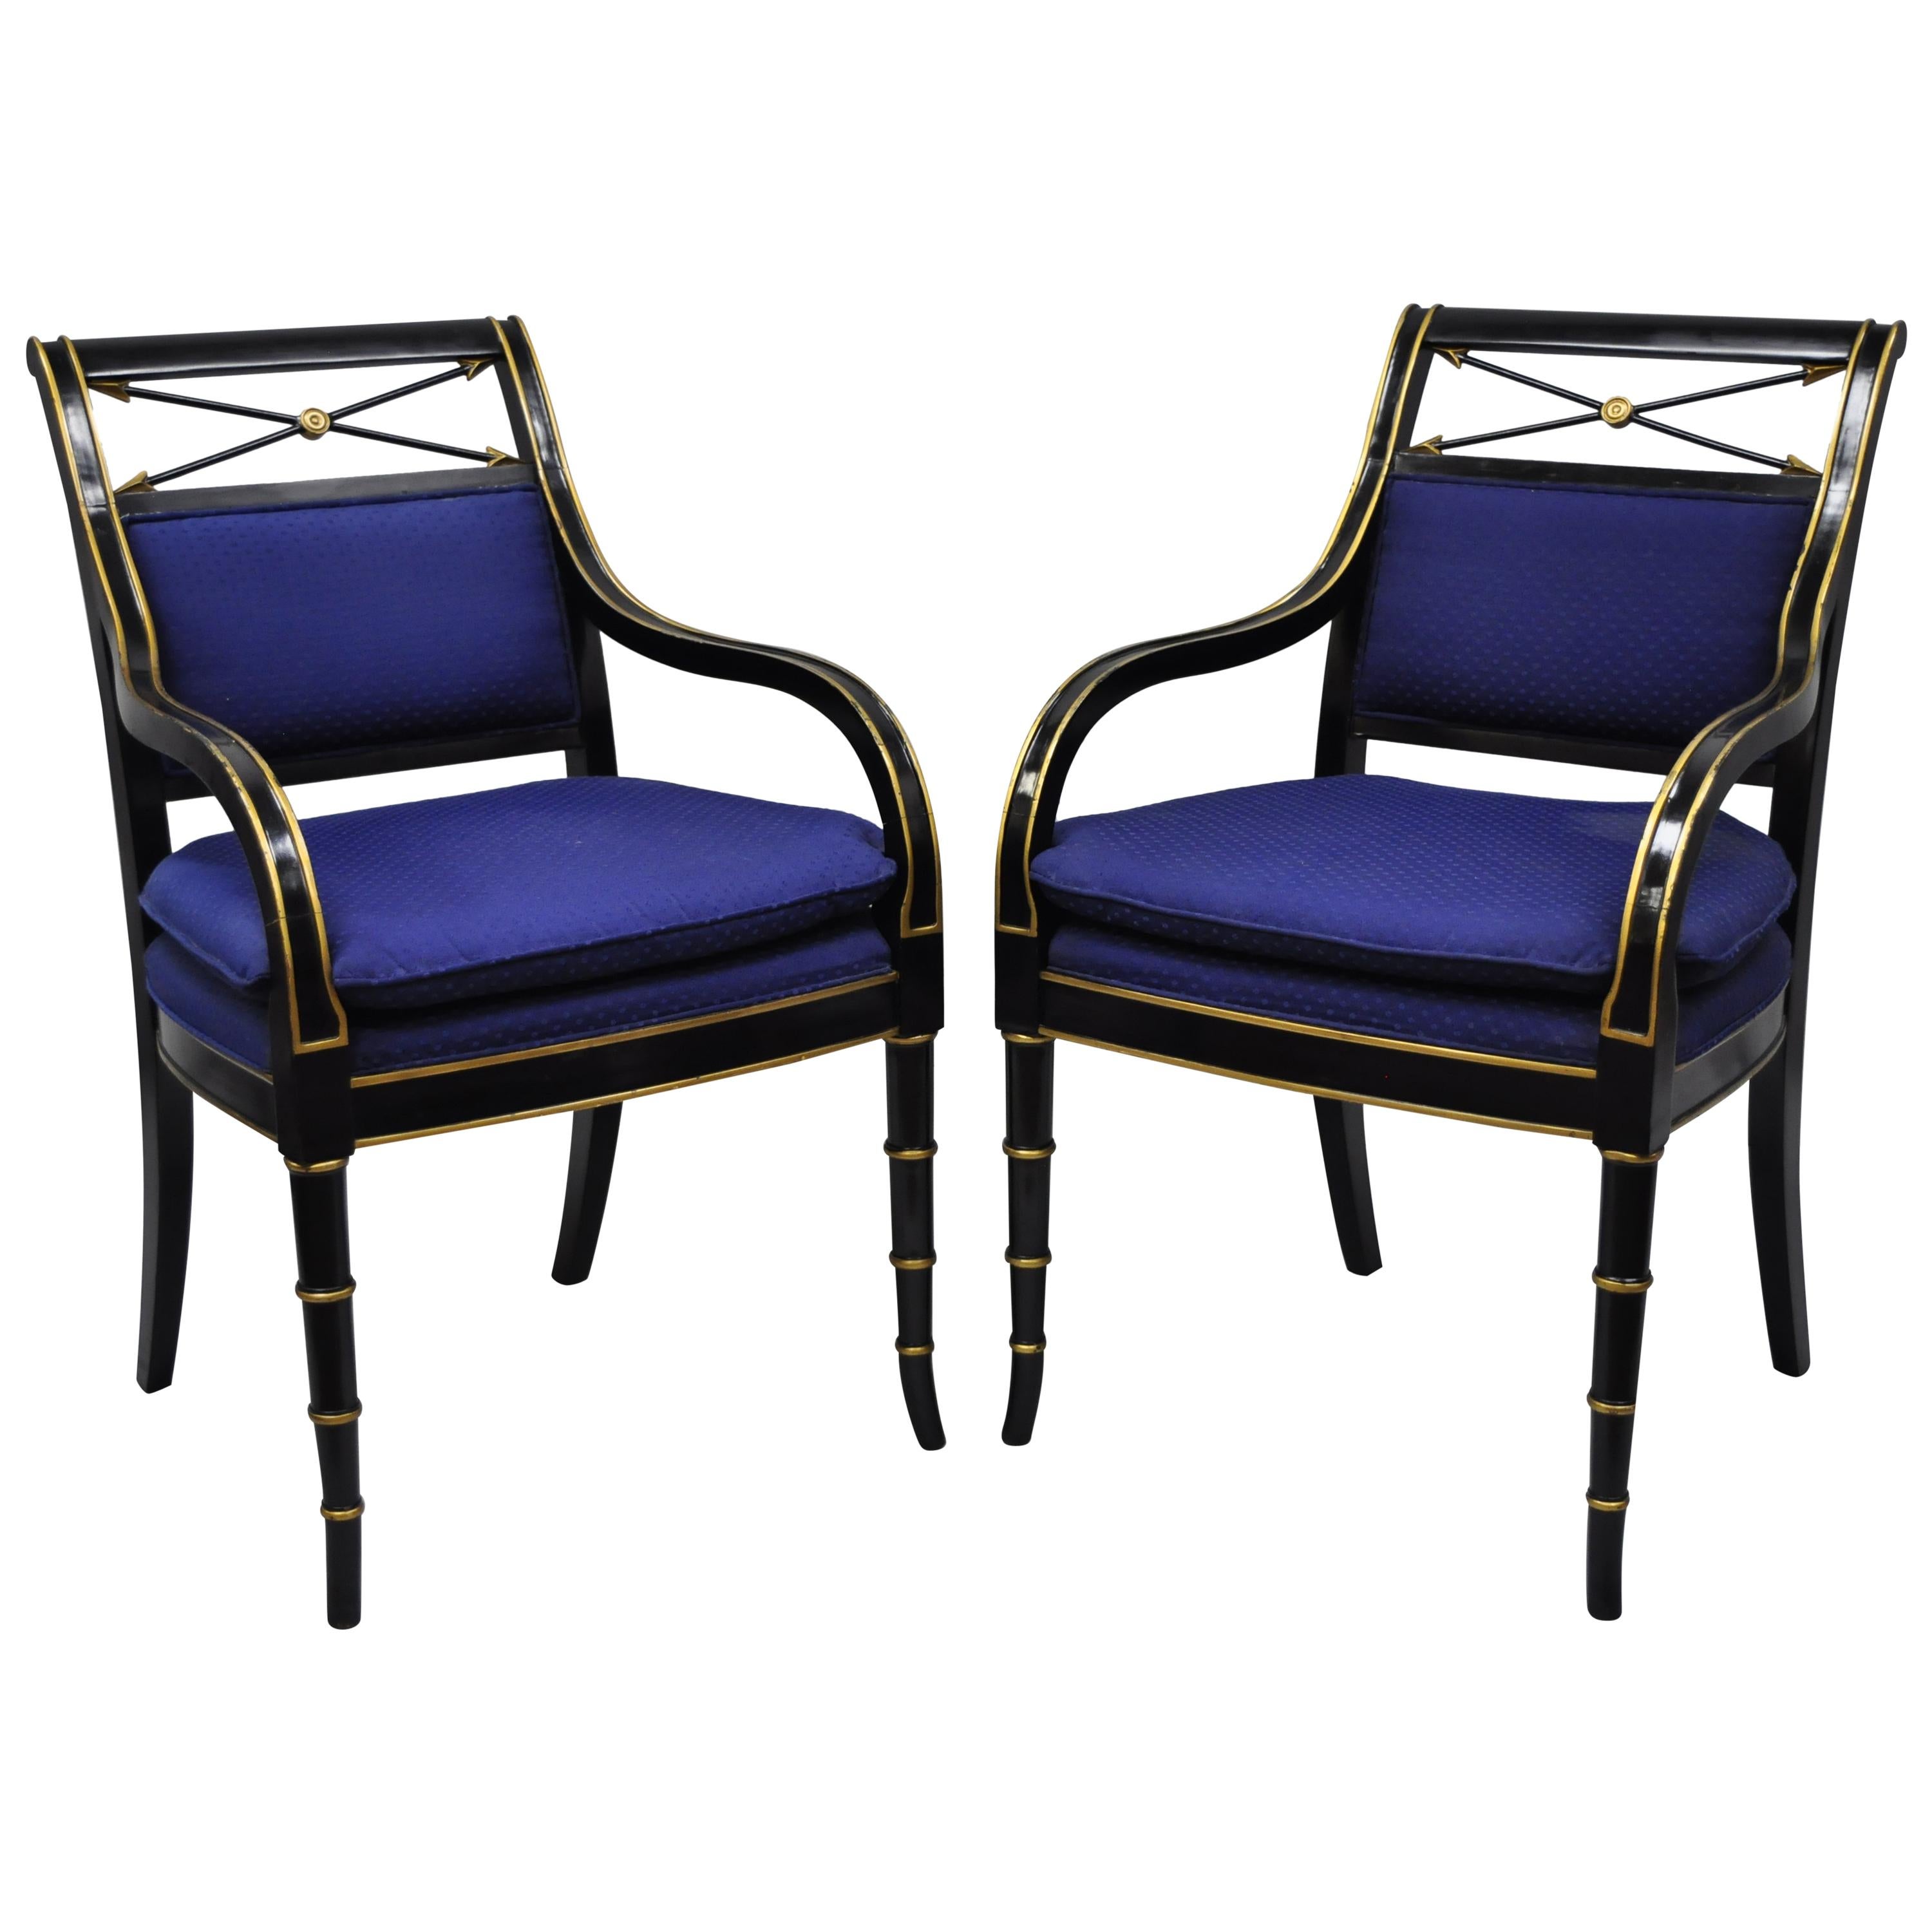 Black & Gold English Regency Style Arrow Back Armchairs Neoclassical Chair, Pair